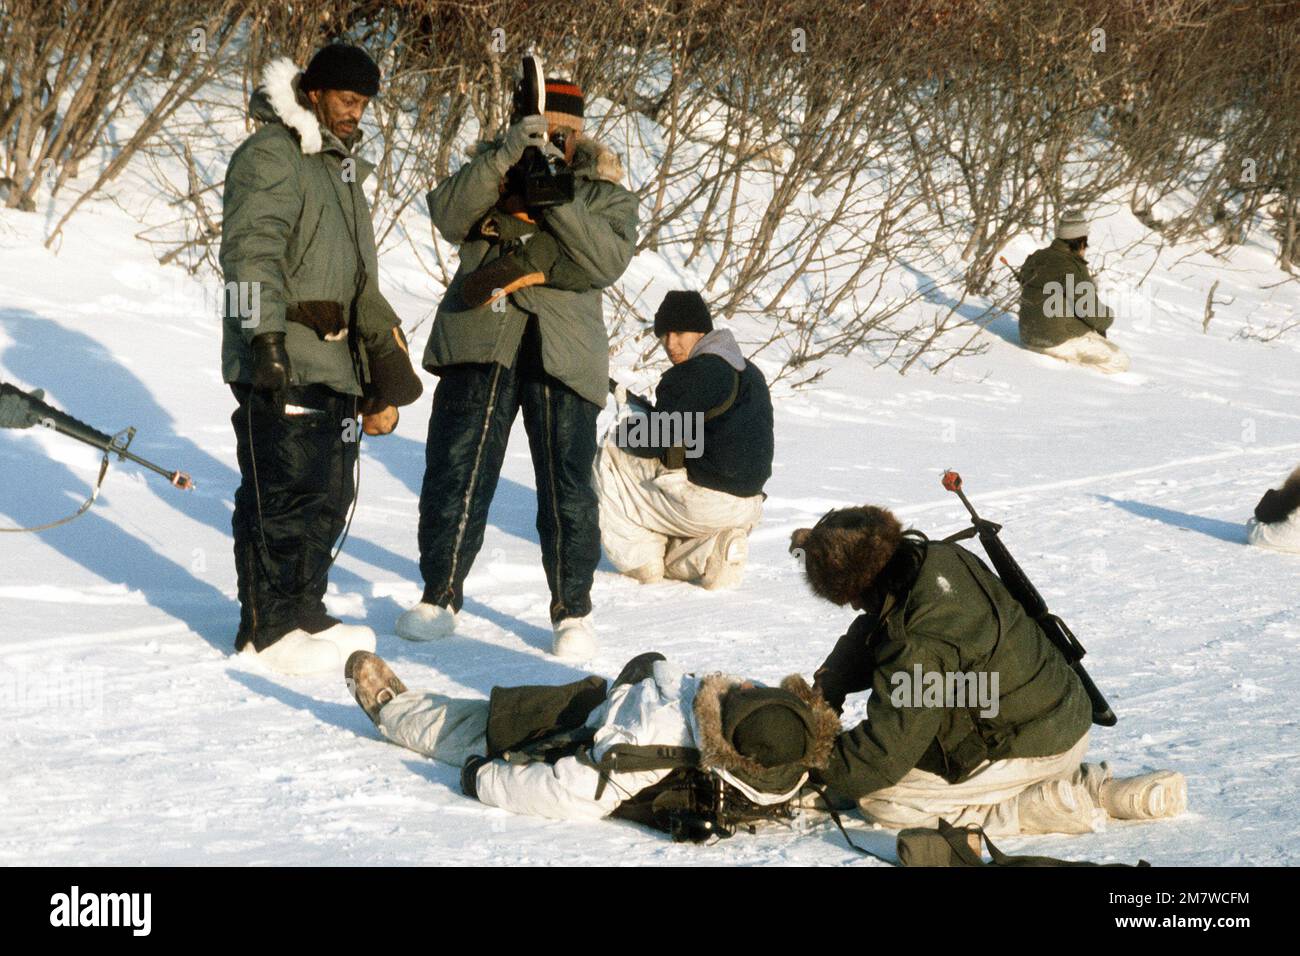 A motion picture specialist shoots 16mm film footage of a 'wounded' soldier during Exercise Cool Snowhog '82. Subject Operation/Series: COOL SNOWHOG '82 Base: Kotzebue State: Alaska (AK) Country: United States Of America (USA) Stock Photo